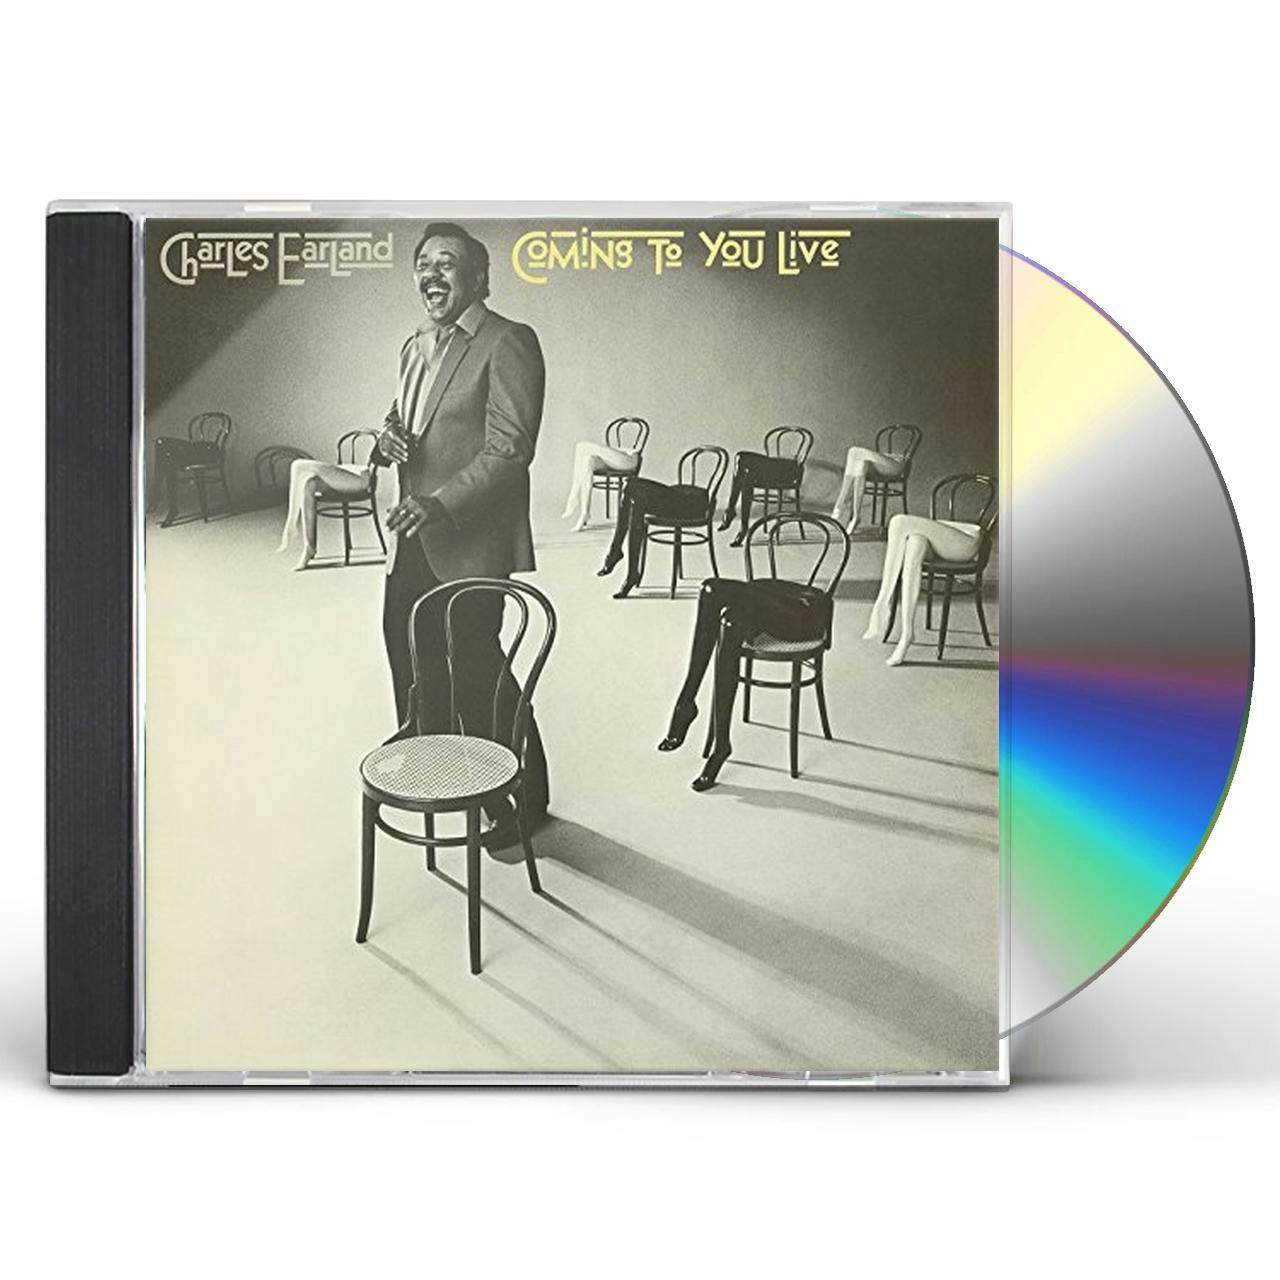 LIVE　YOU　CD　COMING　Earland　Charles　TO